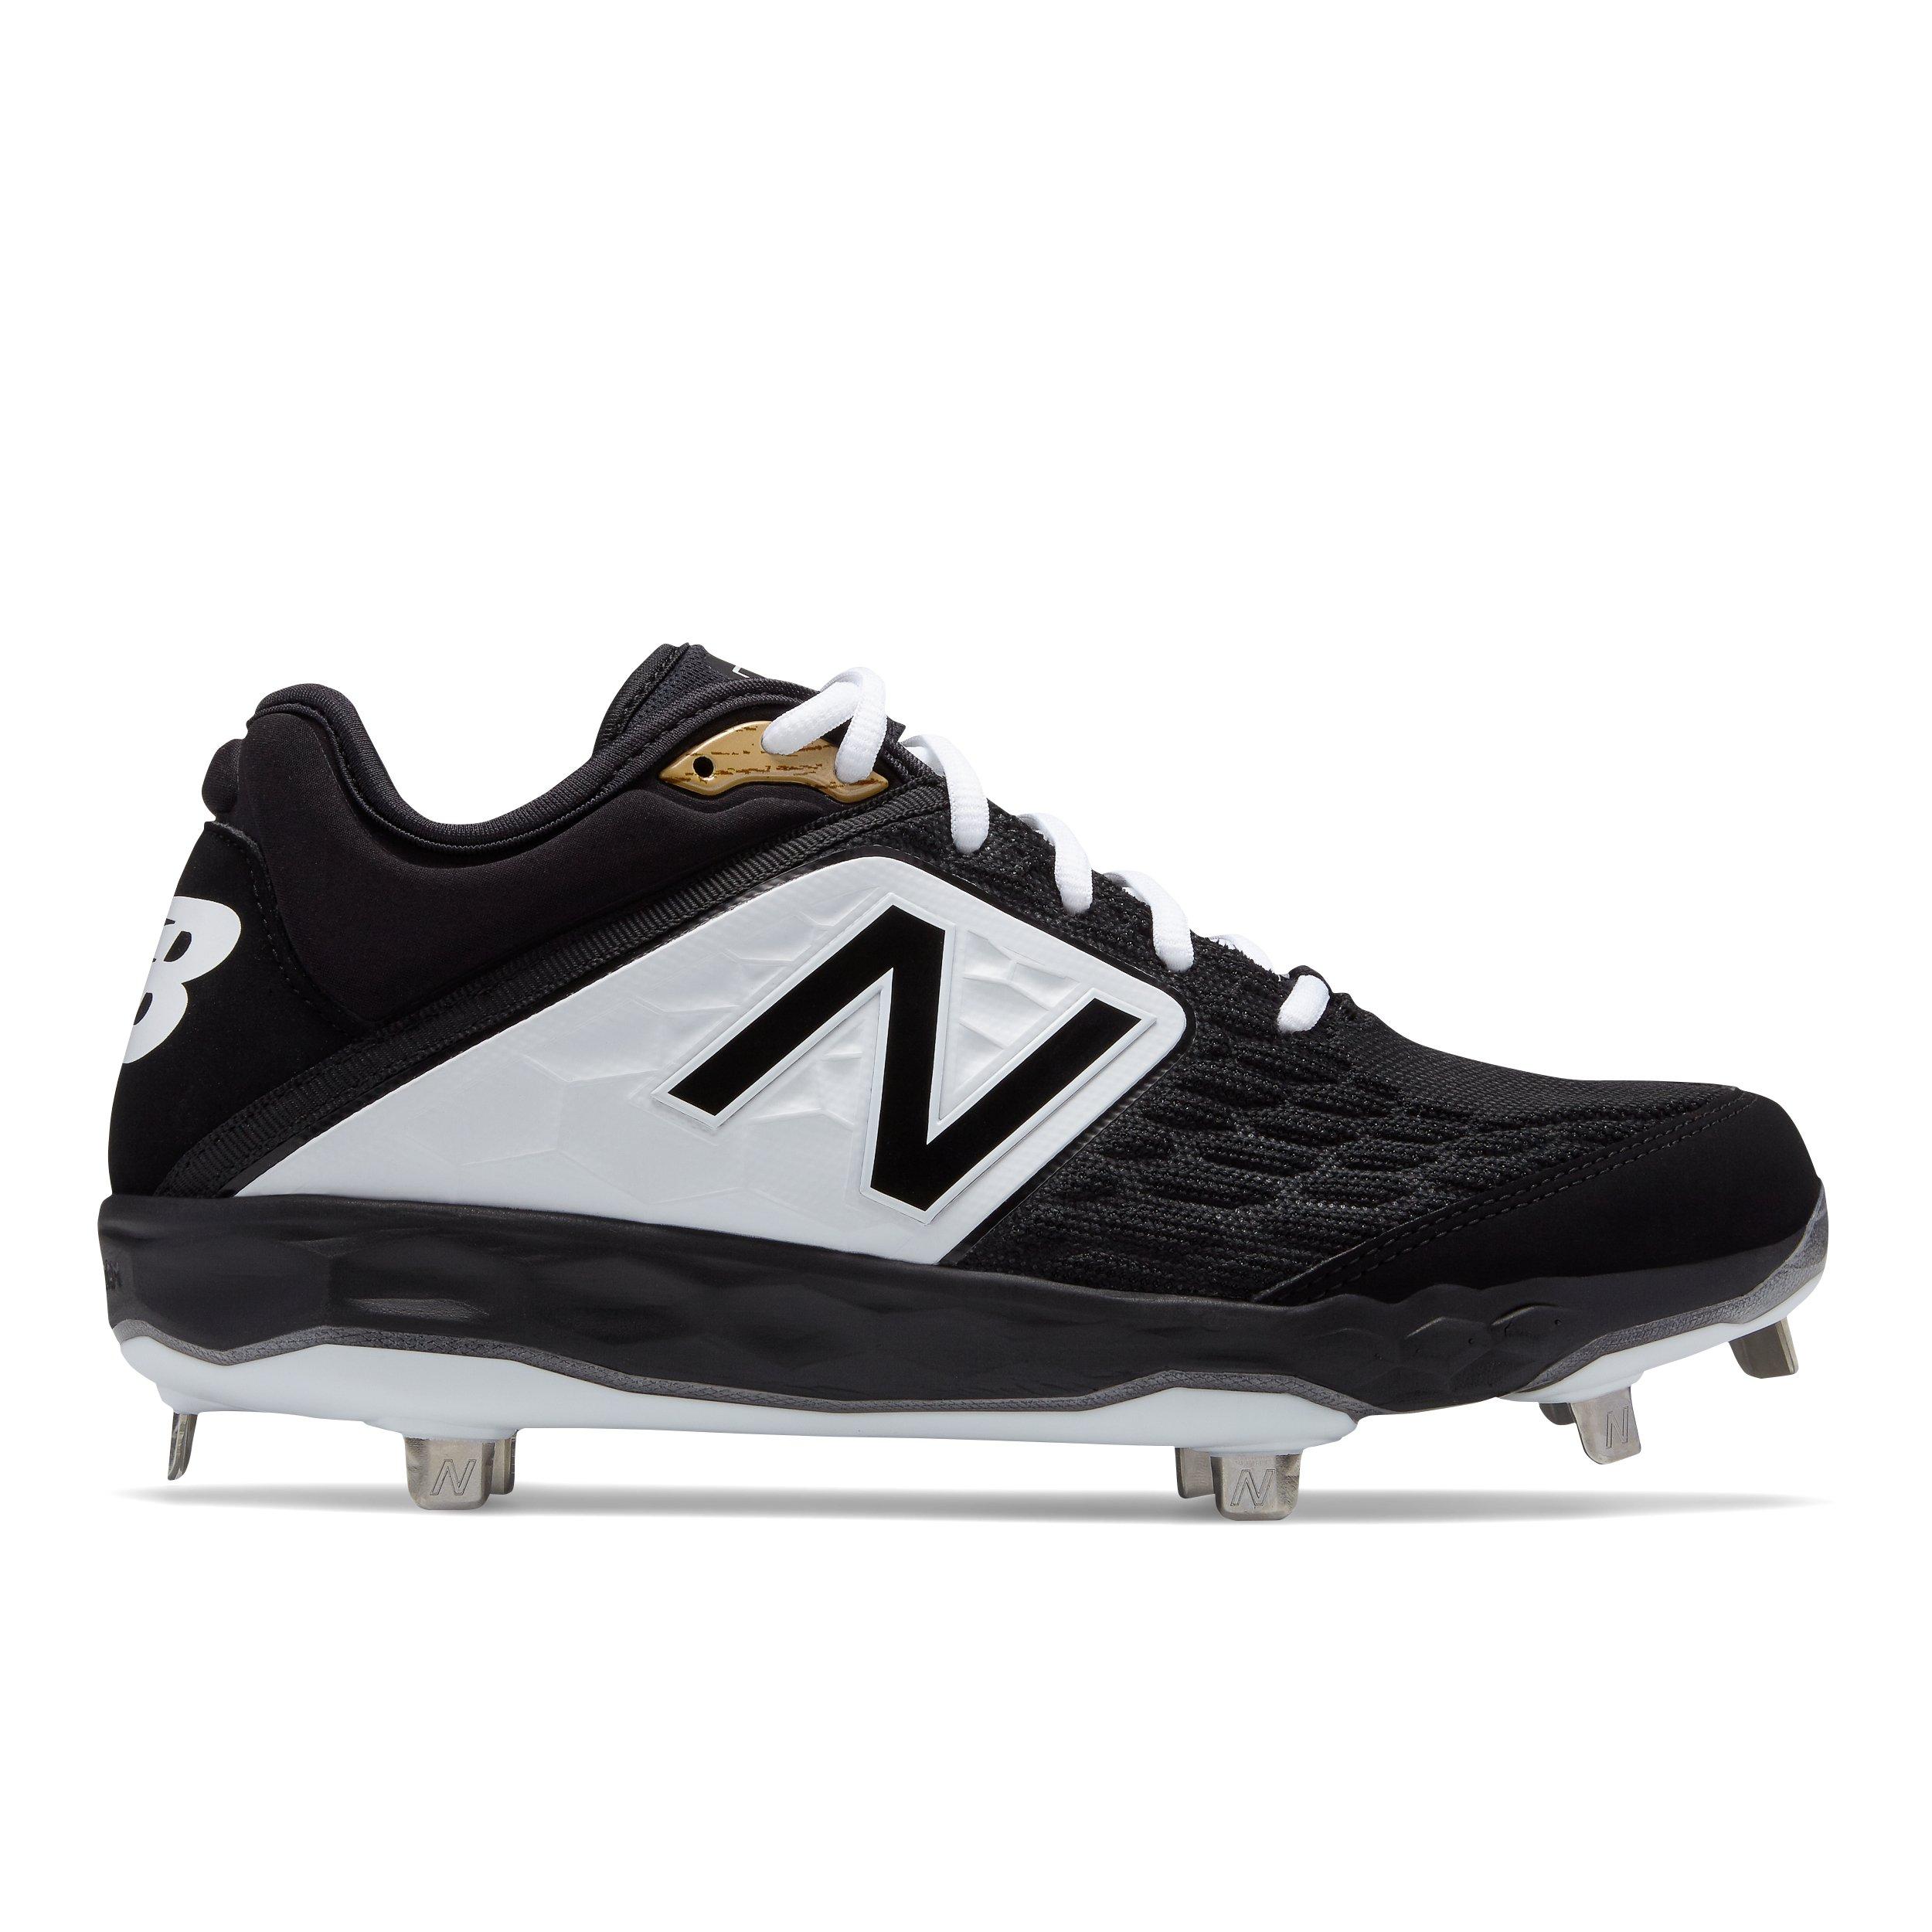 black and gold metal baseball cleats